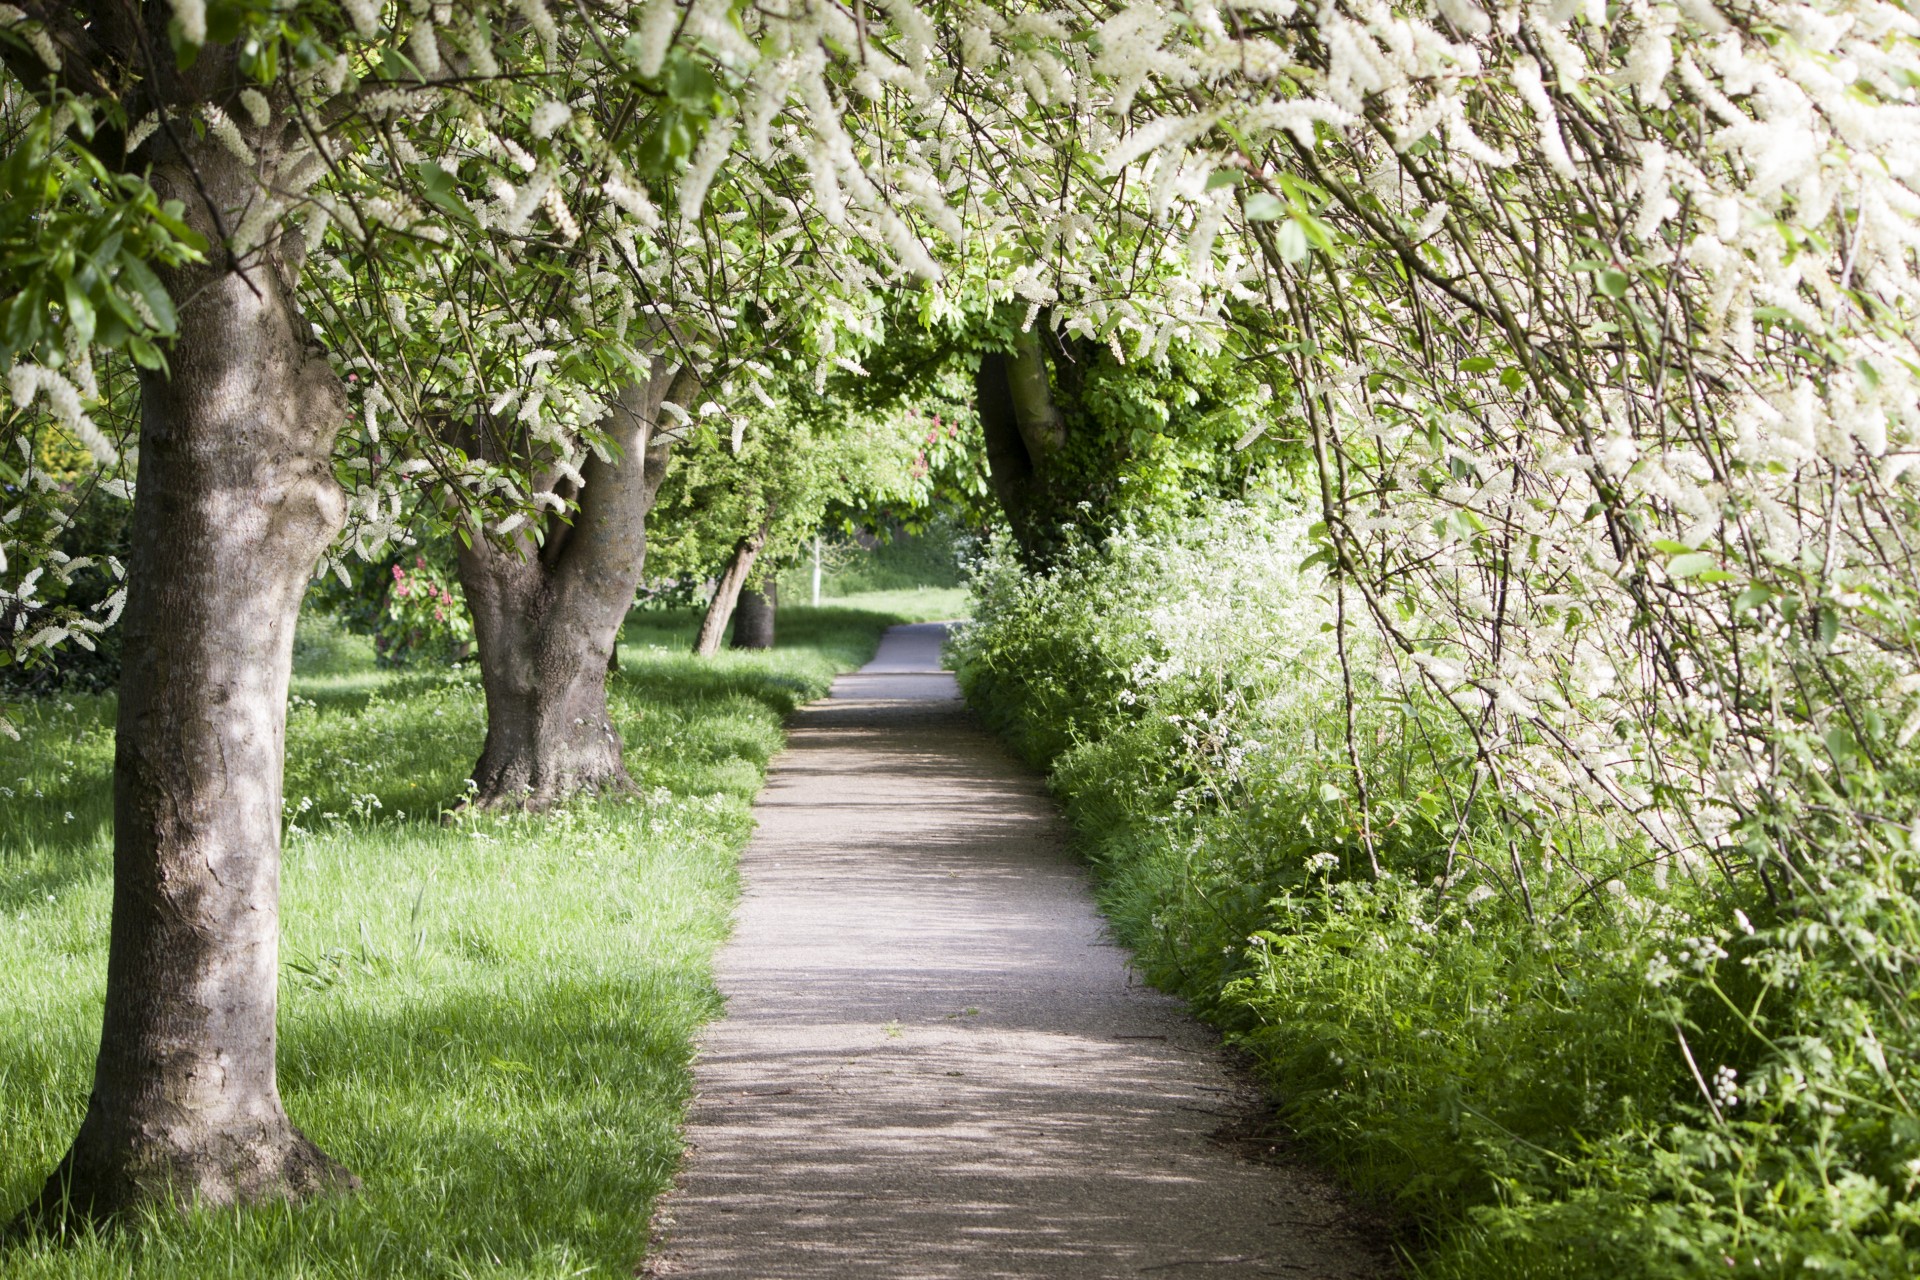 A pathway with bush edgings and lined trees